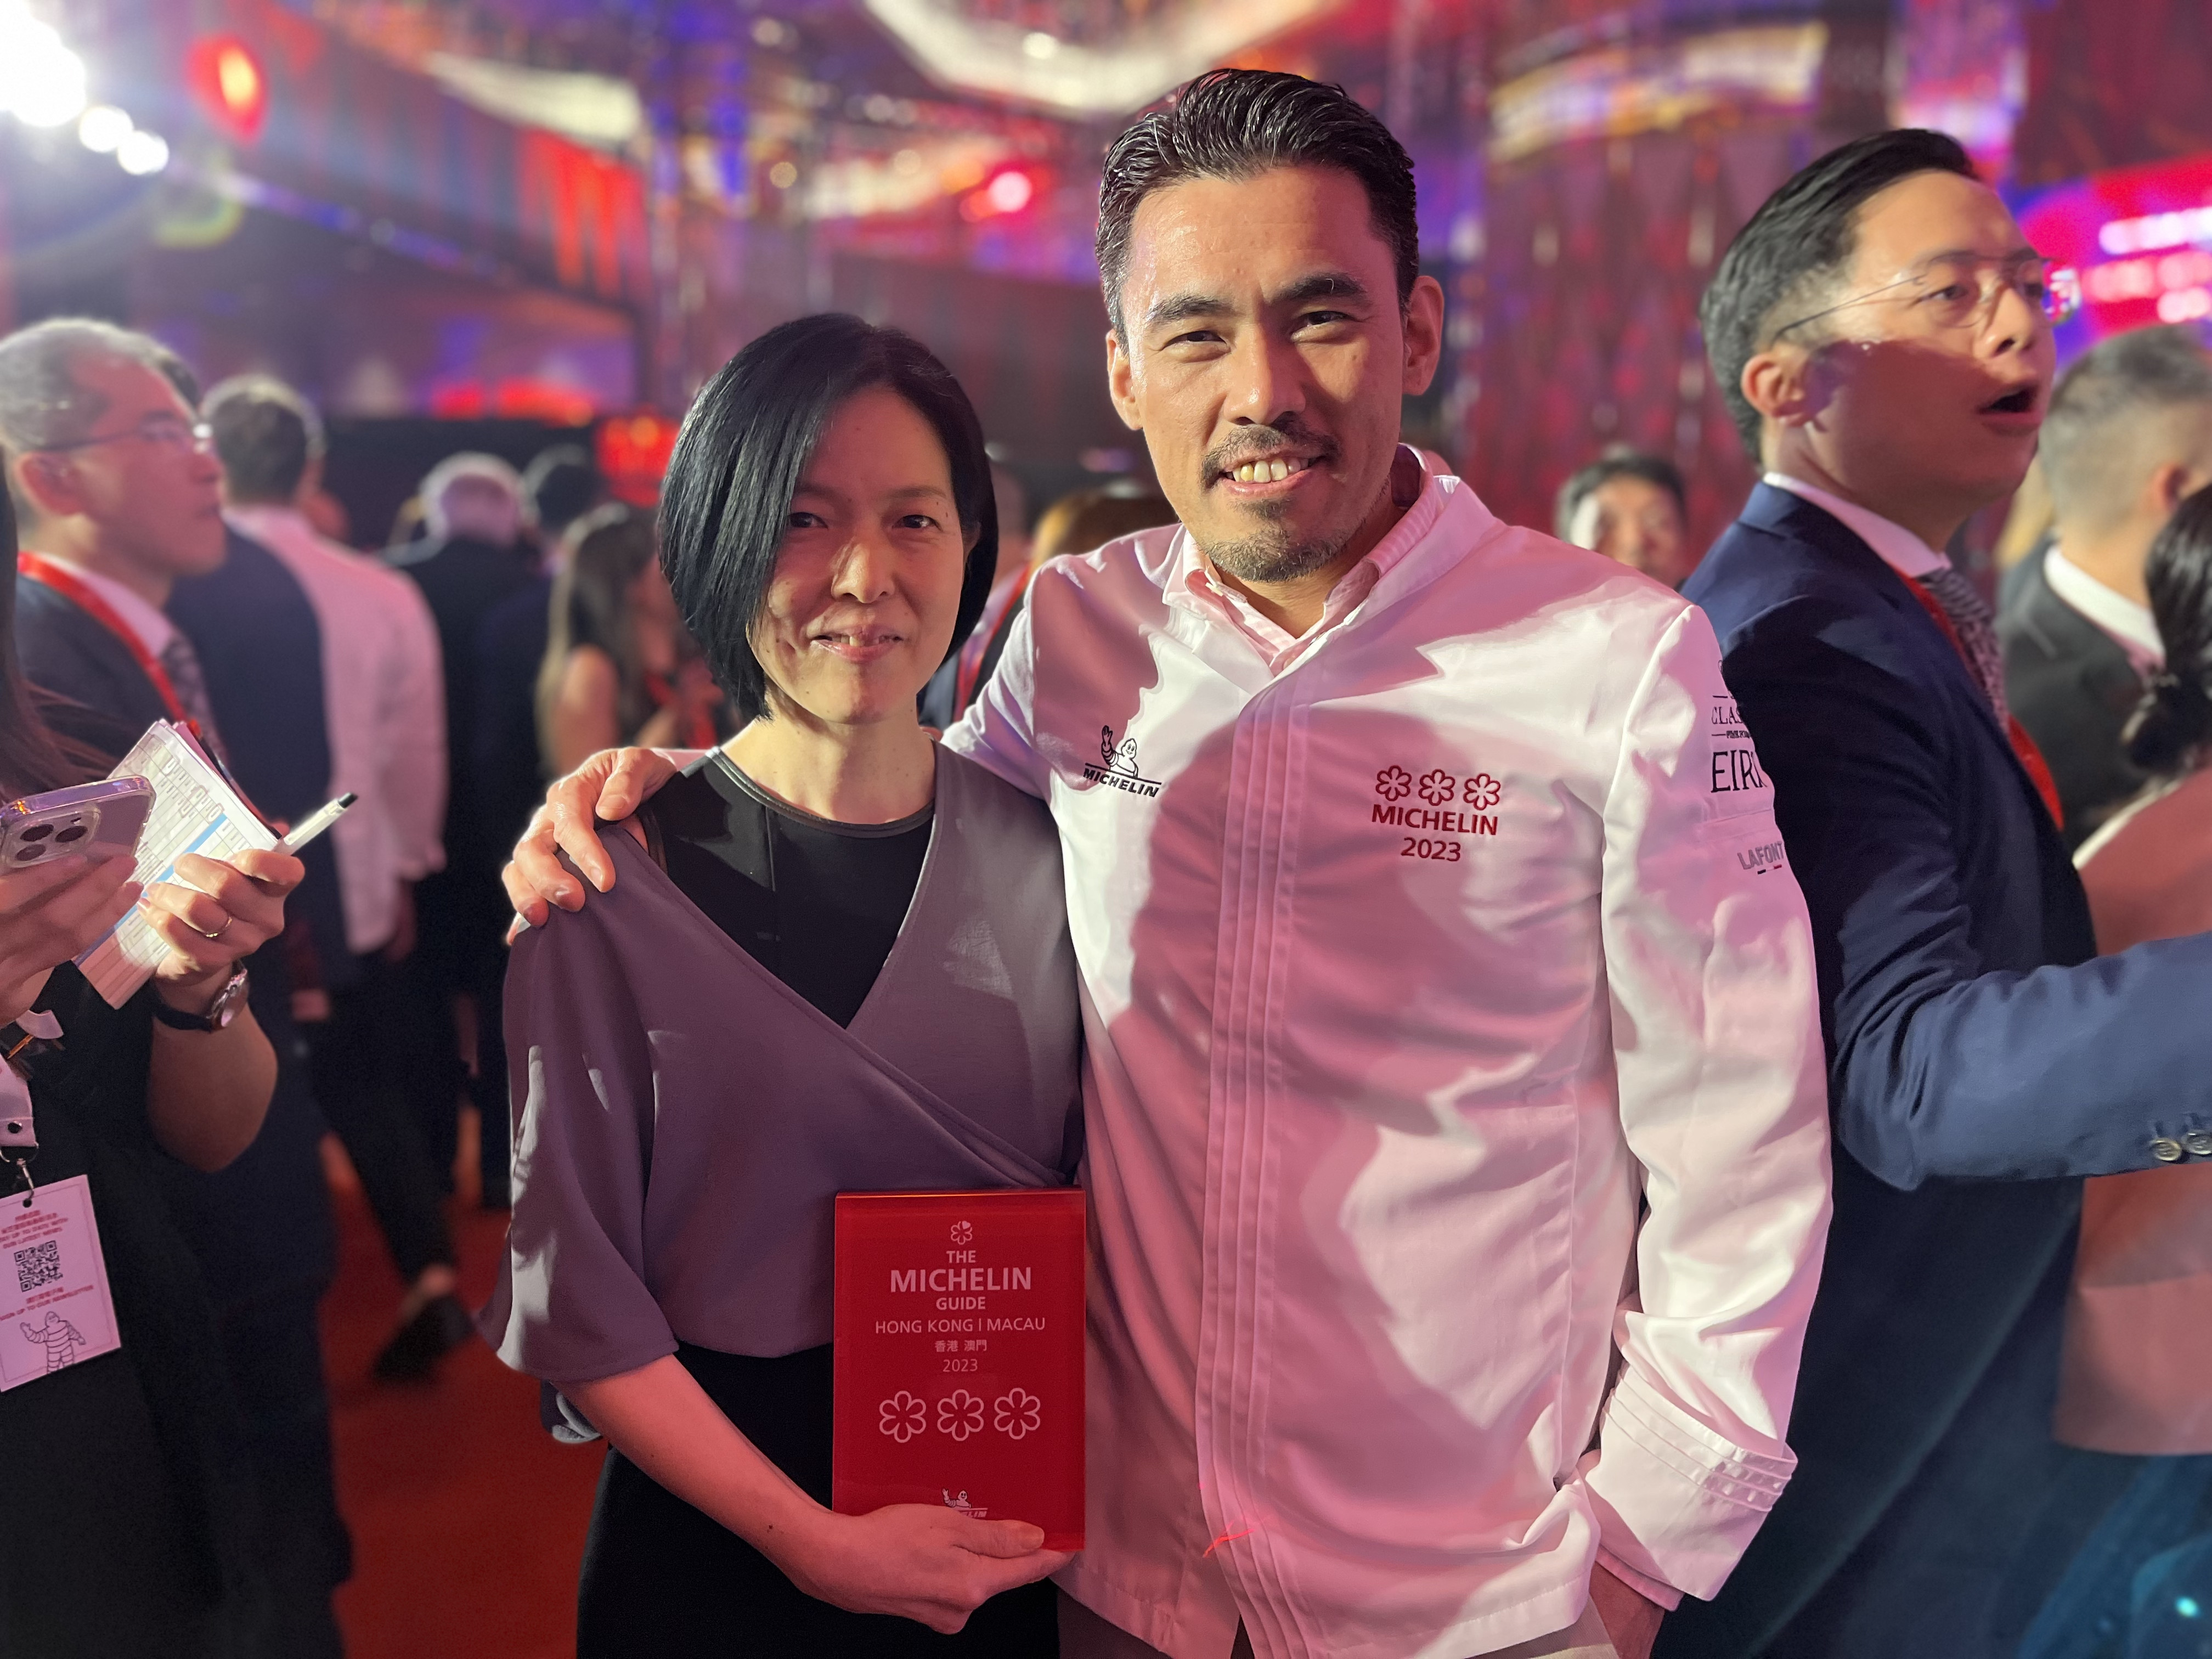 Hiromi Takano and Hideaki Sato of Ta Vie, which earned a third Michelin star in the Michelin Guide 2023 Hong Kong and Macau, at the ceremony in Macau to unveil the new edition. Photo: Charmaine Mok